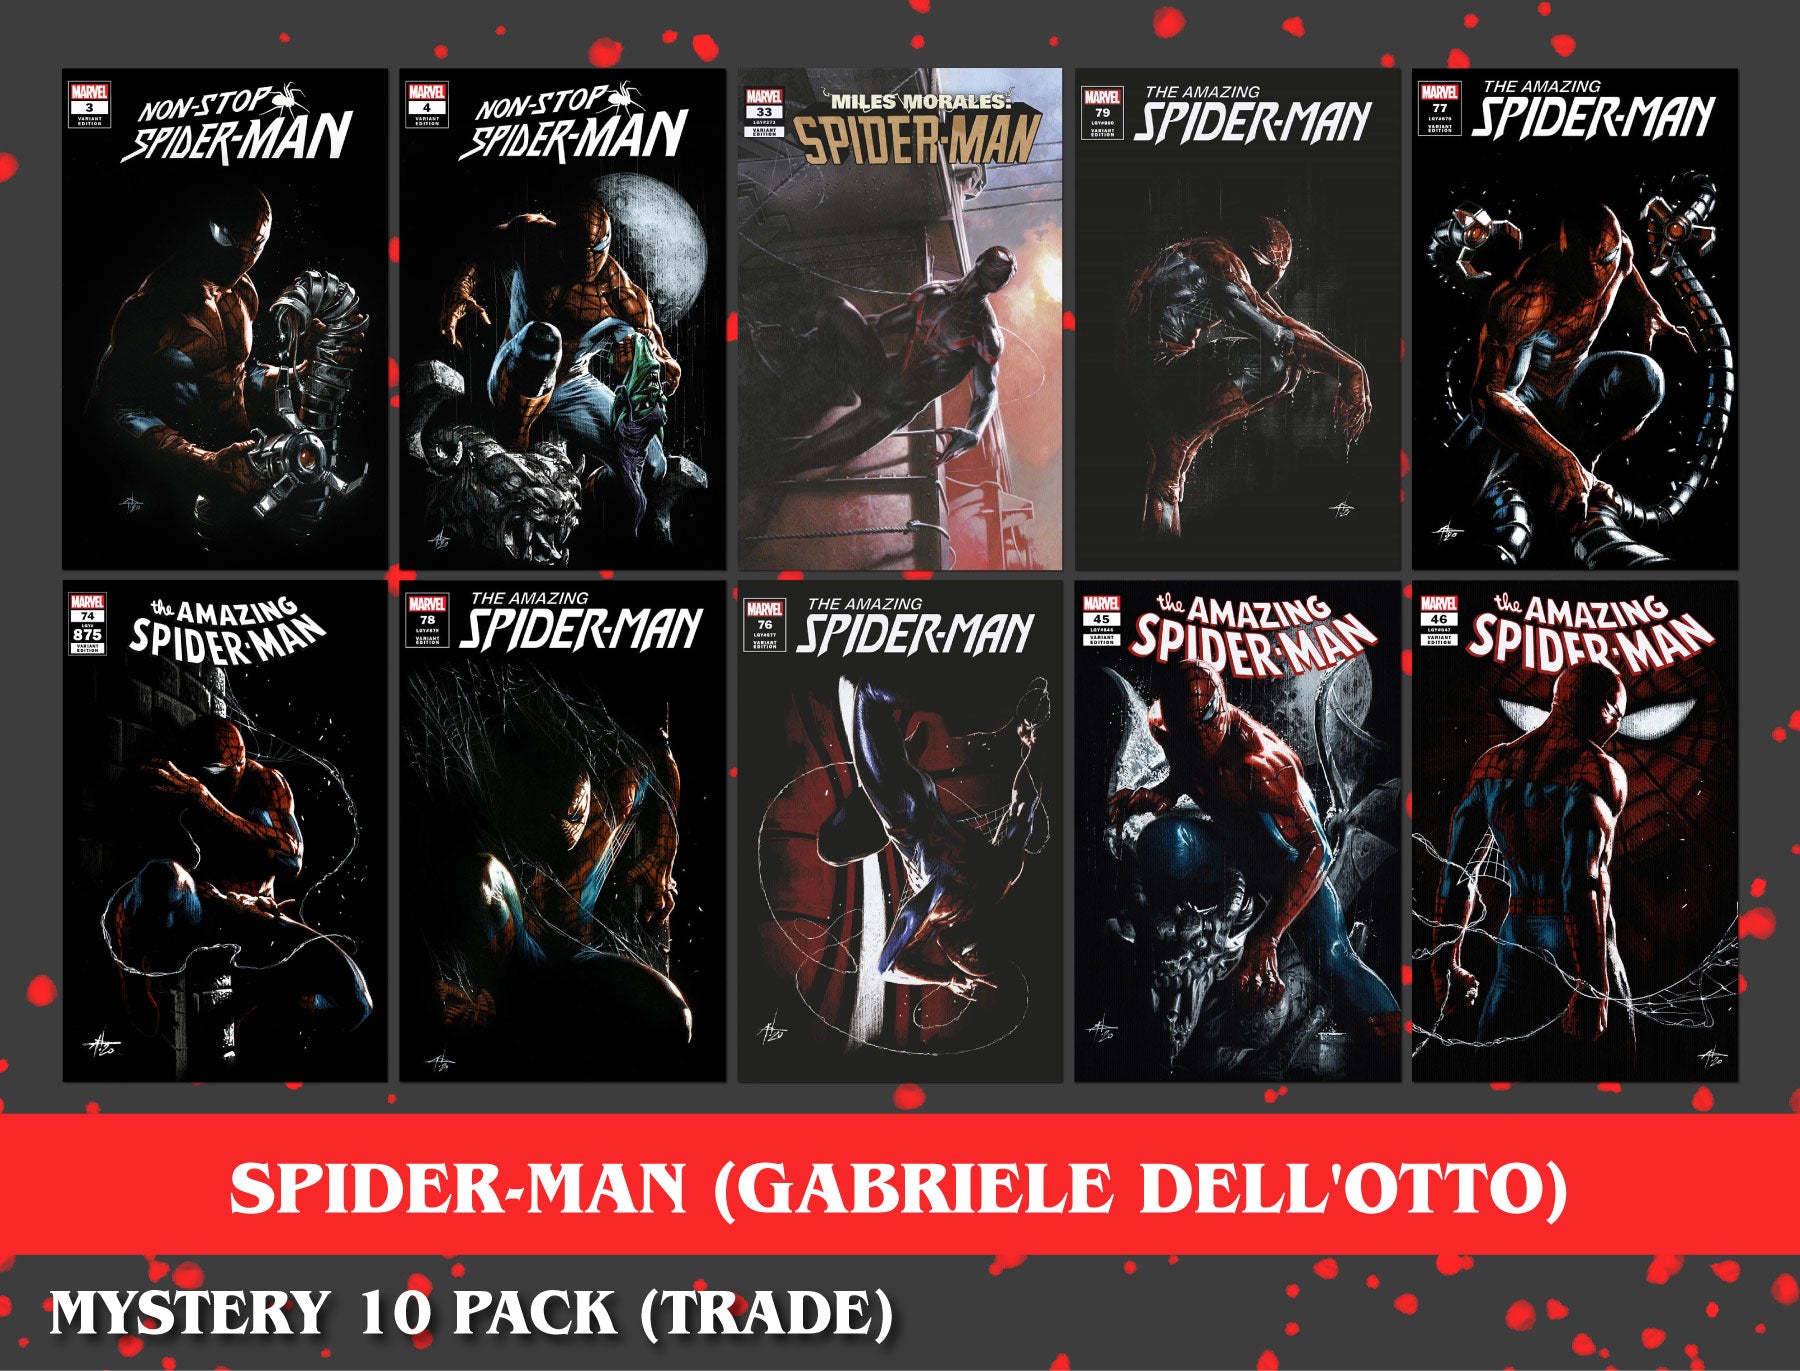 [MYSTERY 10 PACK TRADE] SPIDER-MAN UNKNOWN COMICS GABRIELE DELL'OTTO EXCLUSIVE VAR BUNDLE (06/21/2023)